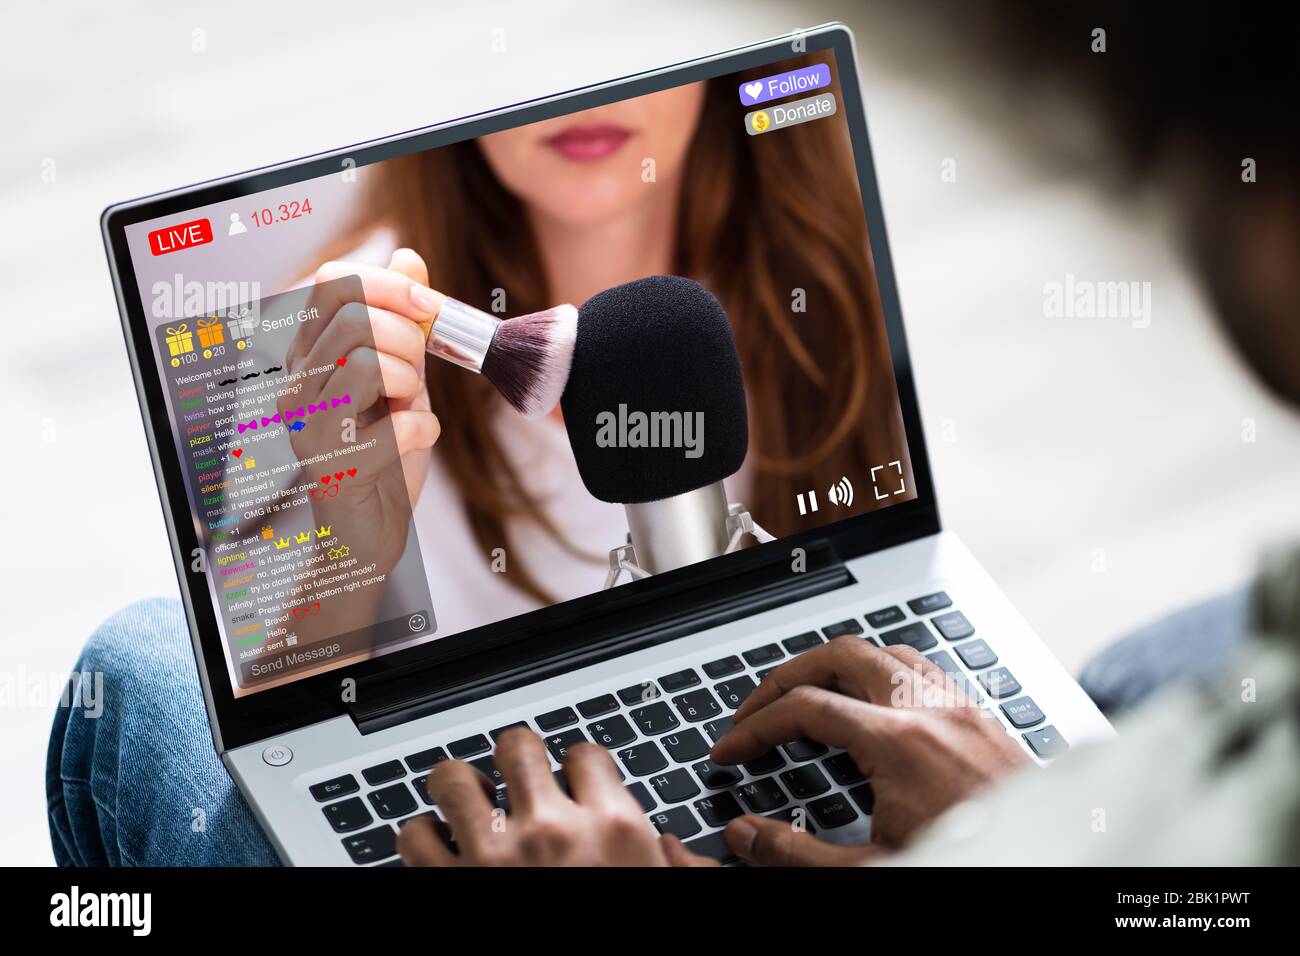 Streaming Live ASMR Video On Laptop Computer Stock Photo